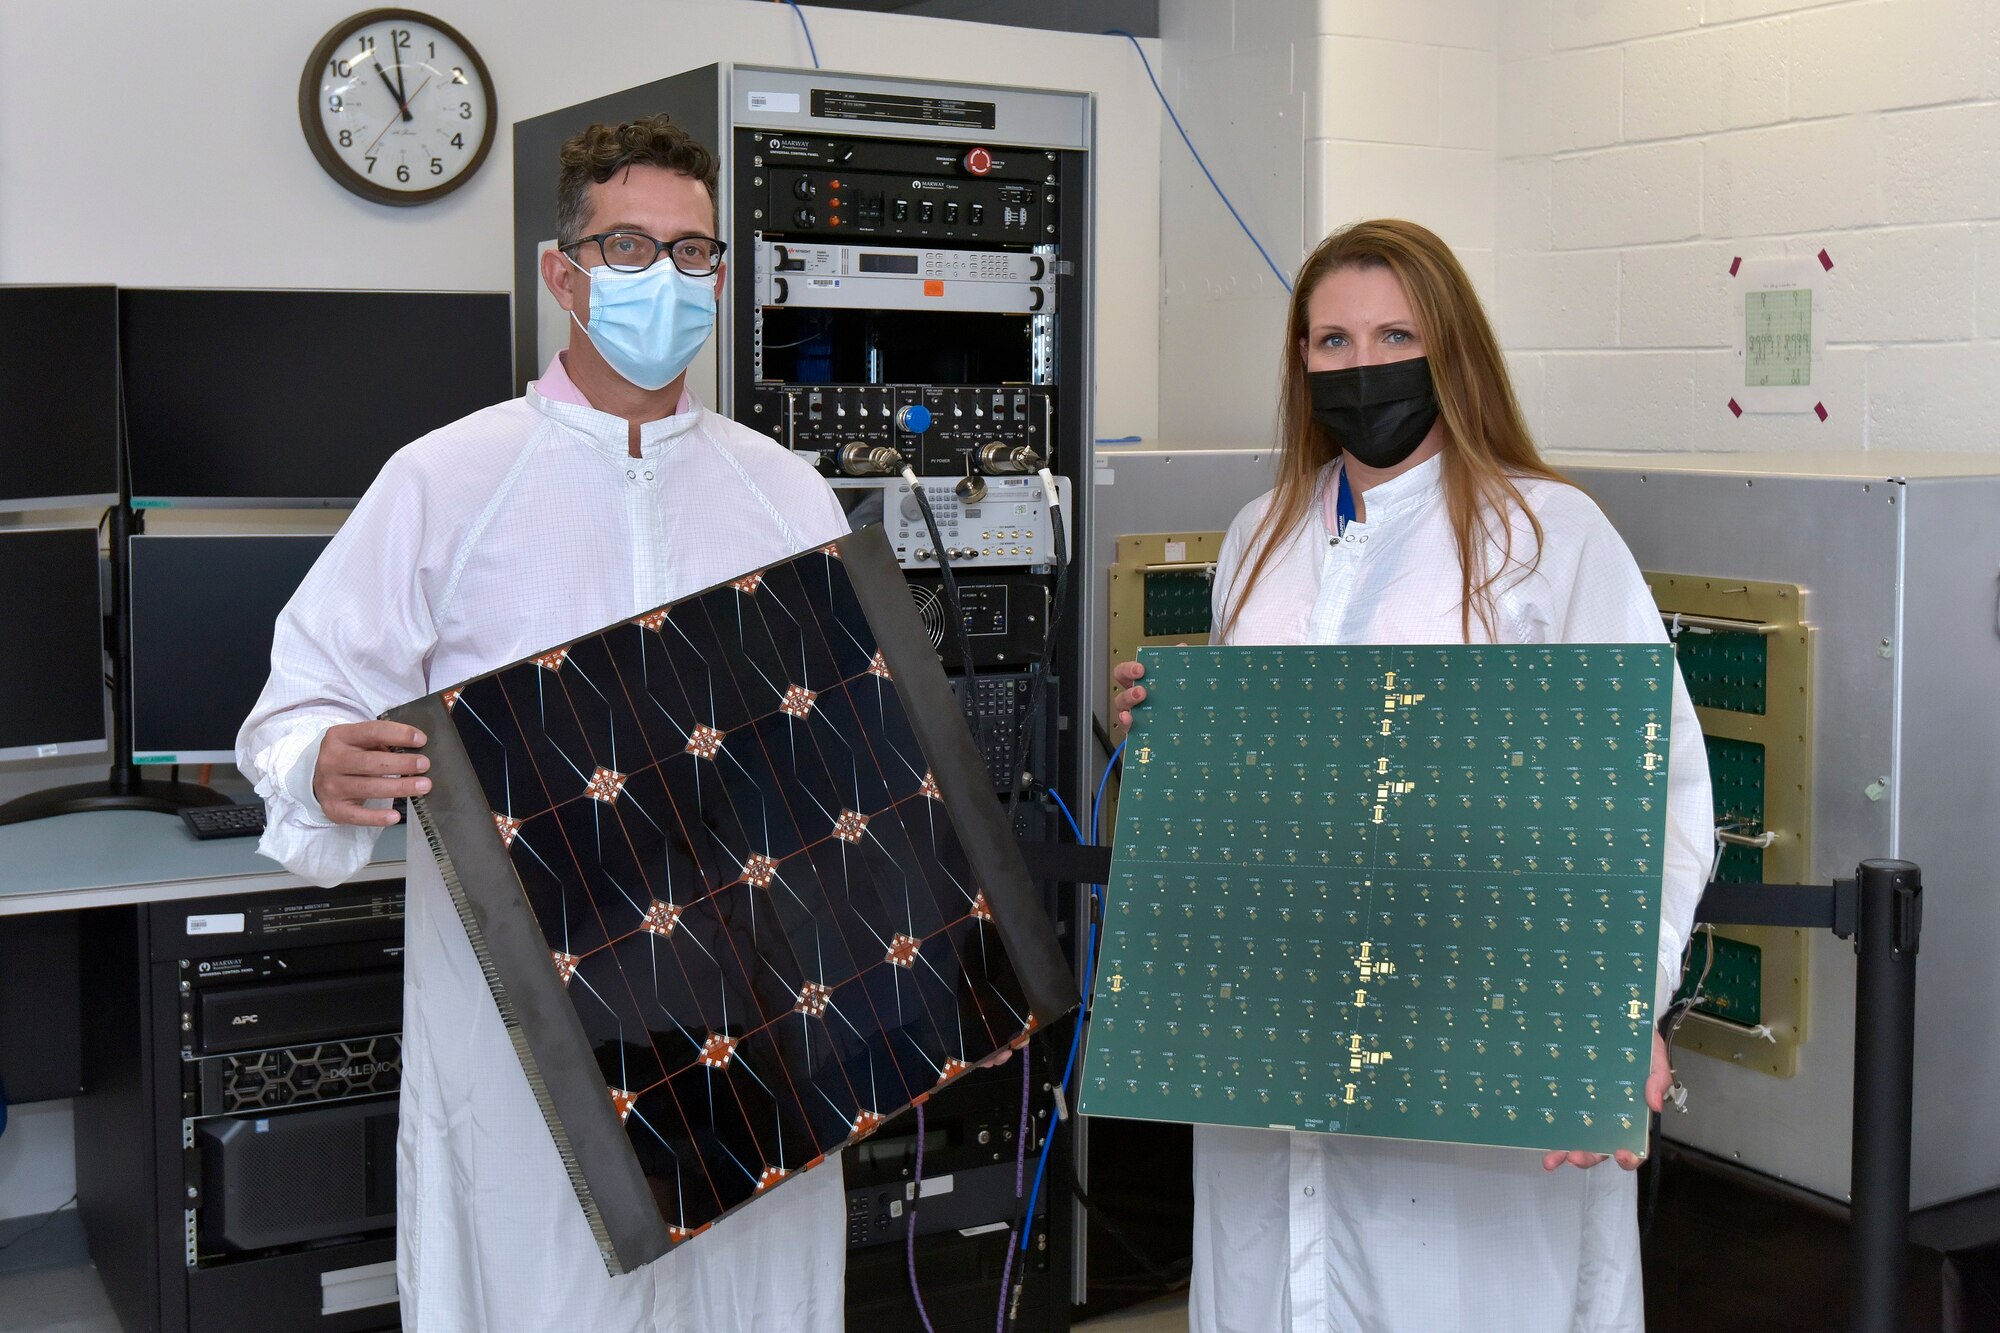 Project Managers James Winter (Air Force Research Laboratory) and Tara Theret (Northrop Grumman) hold models of the photovoltaic and the radio frequency sides of the sandwich tile, while at the Linthicum, Maryland facility, to witness the conversion and beaming experiment. (Courtesy photo/Northrop Grumman)